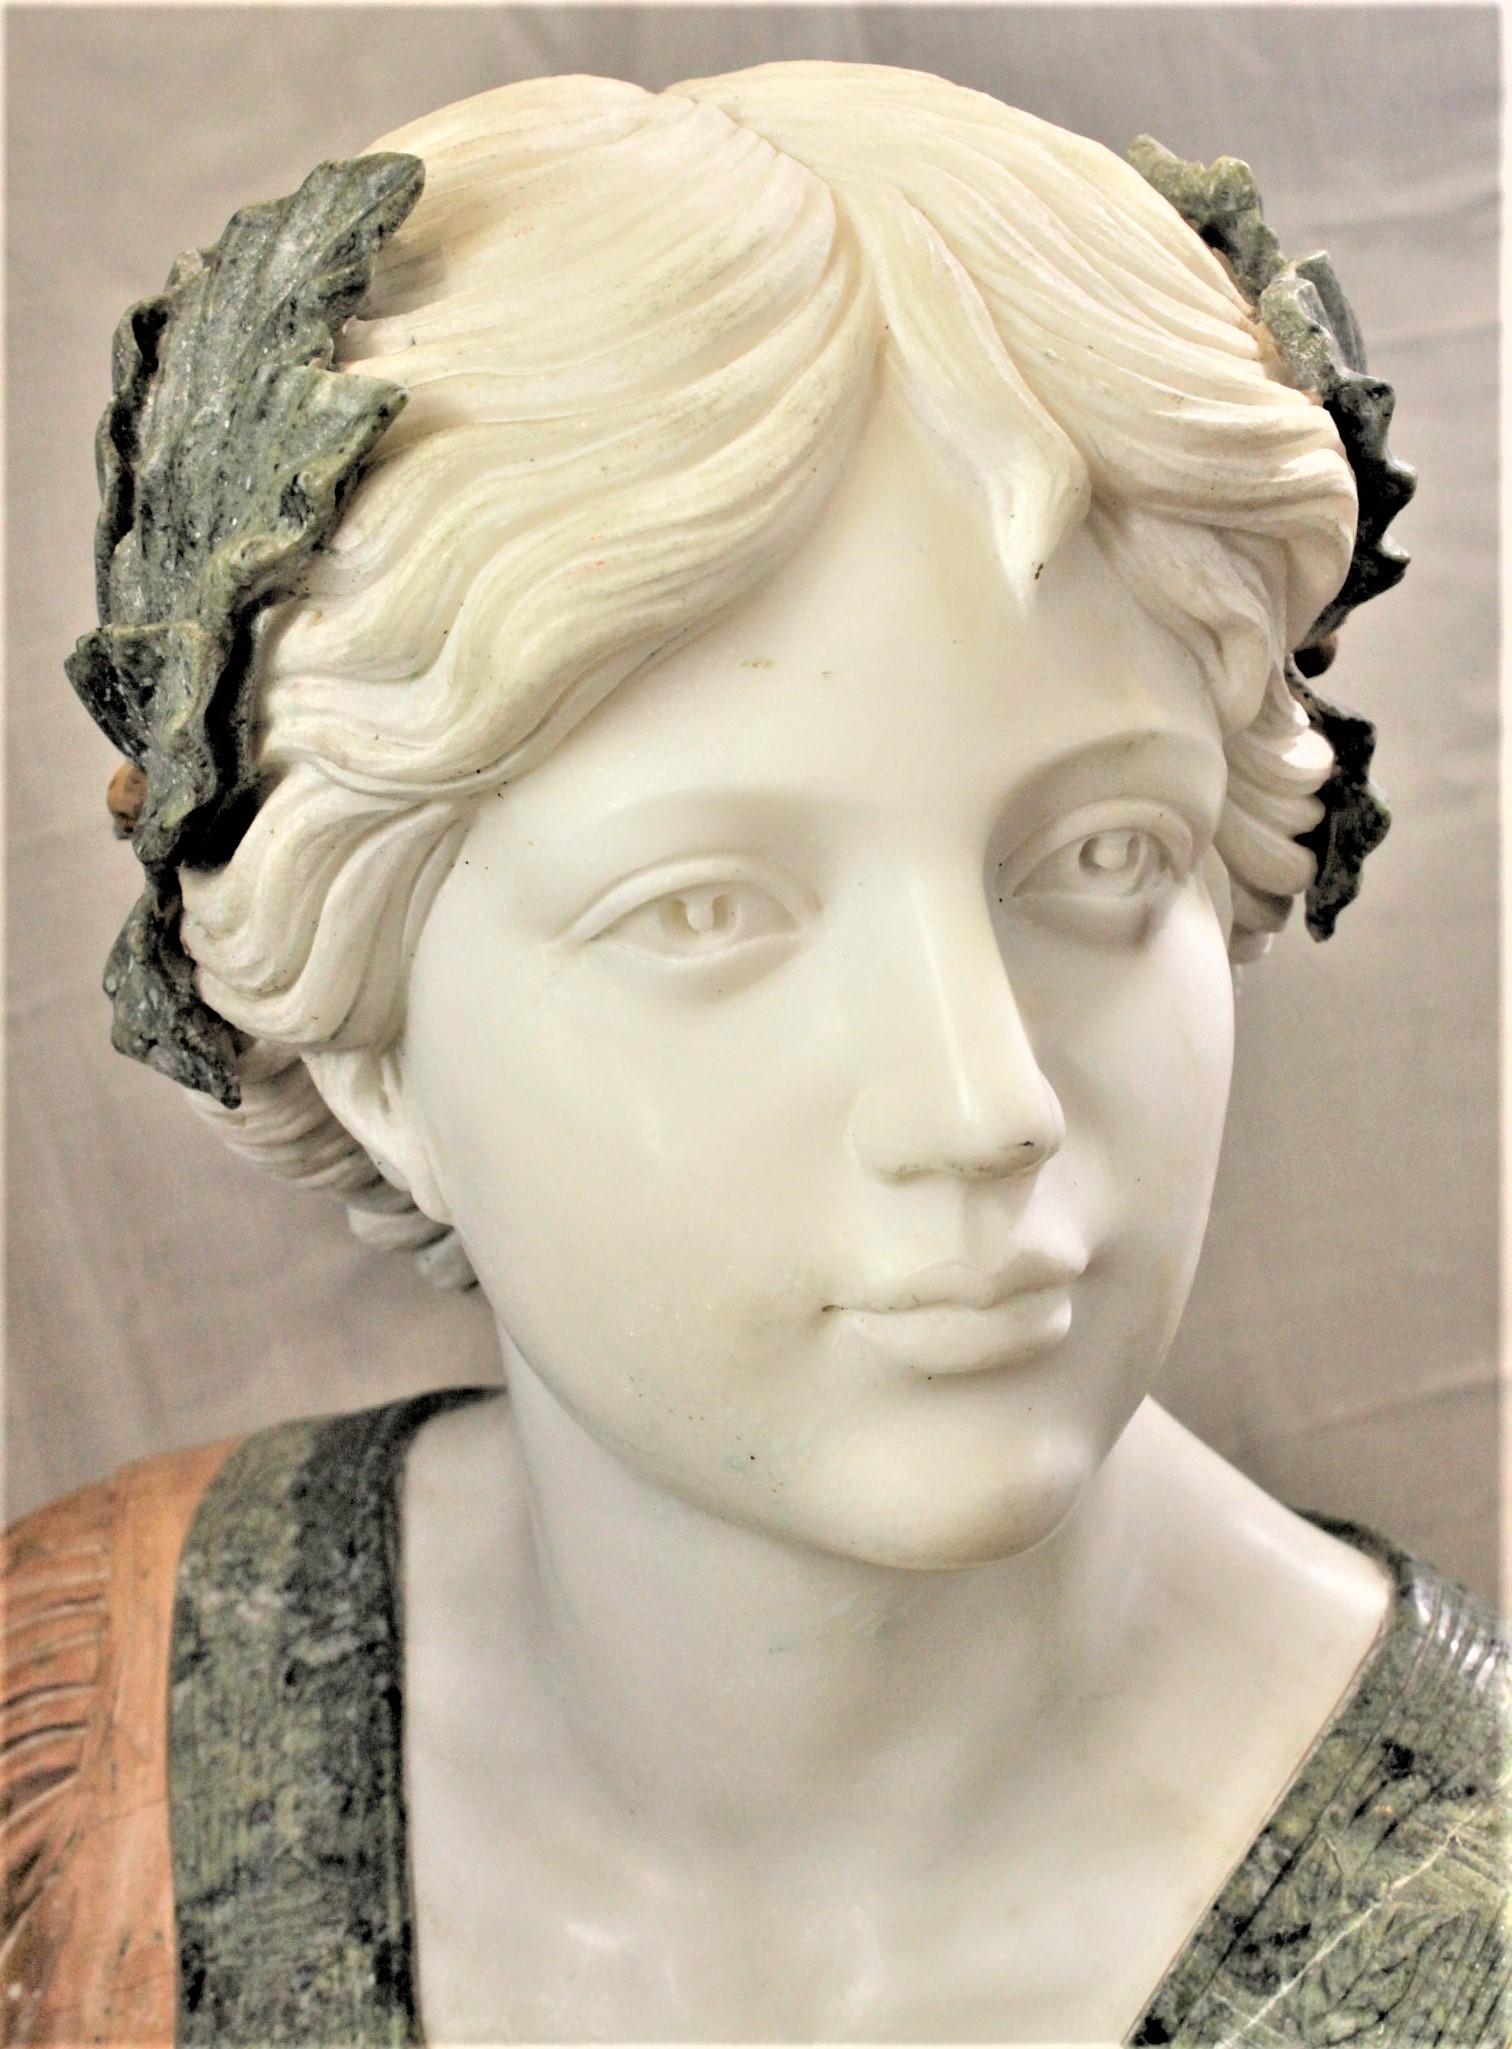 Large Antique Renaissance Styled Hand Carved Marble Female Sculpture or Bust 1